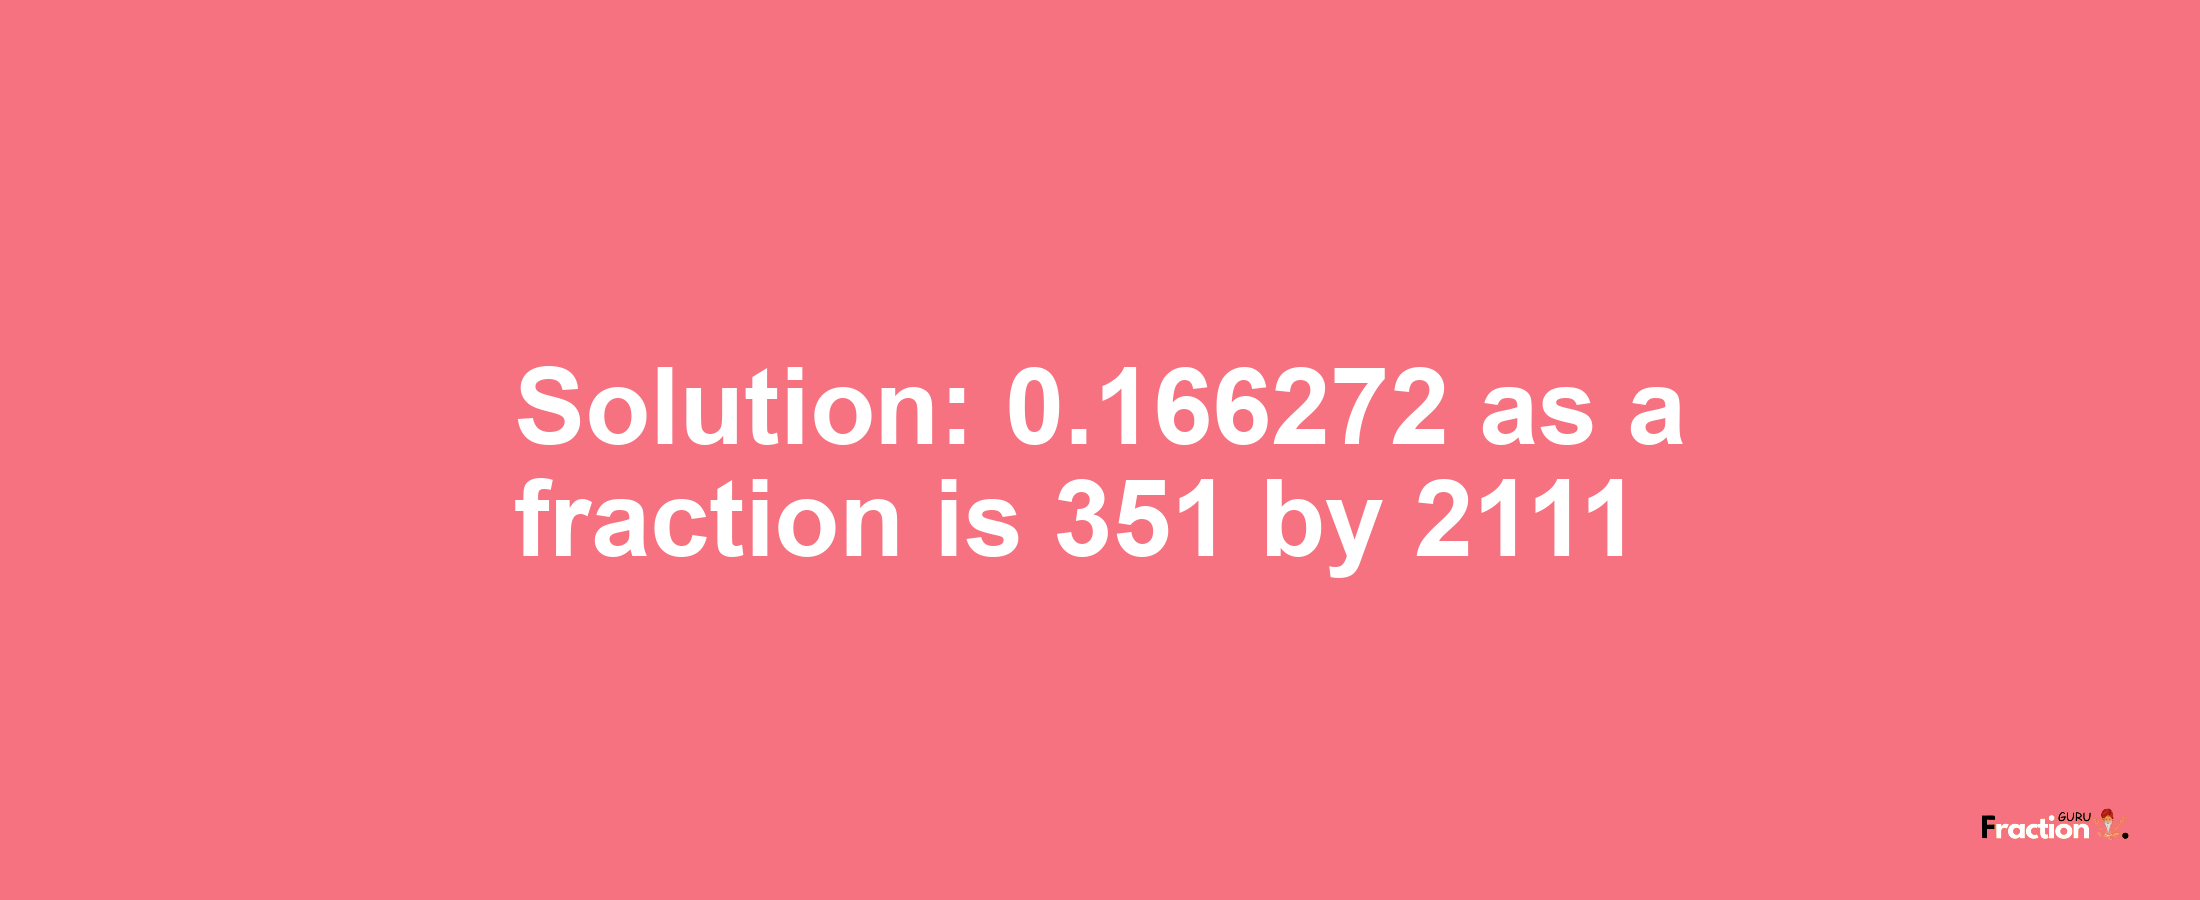 Solution:0.166272 as a fraction is 351/2111